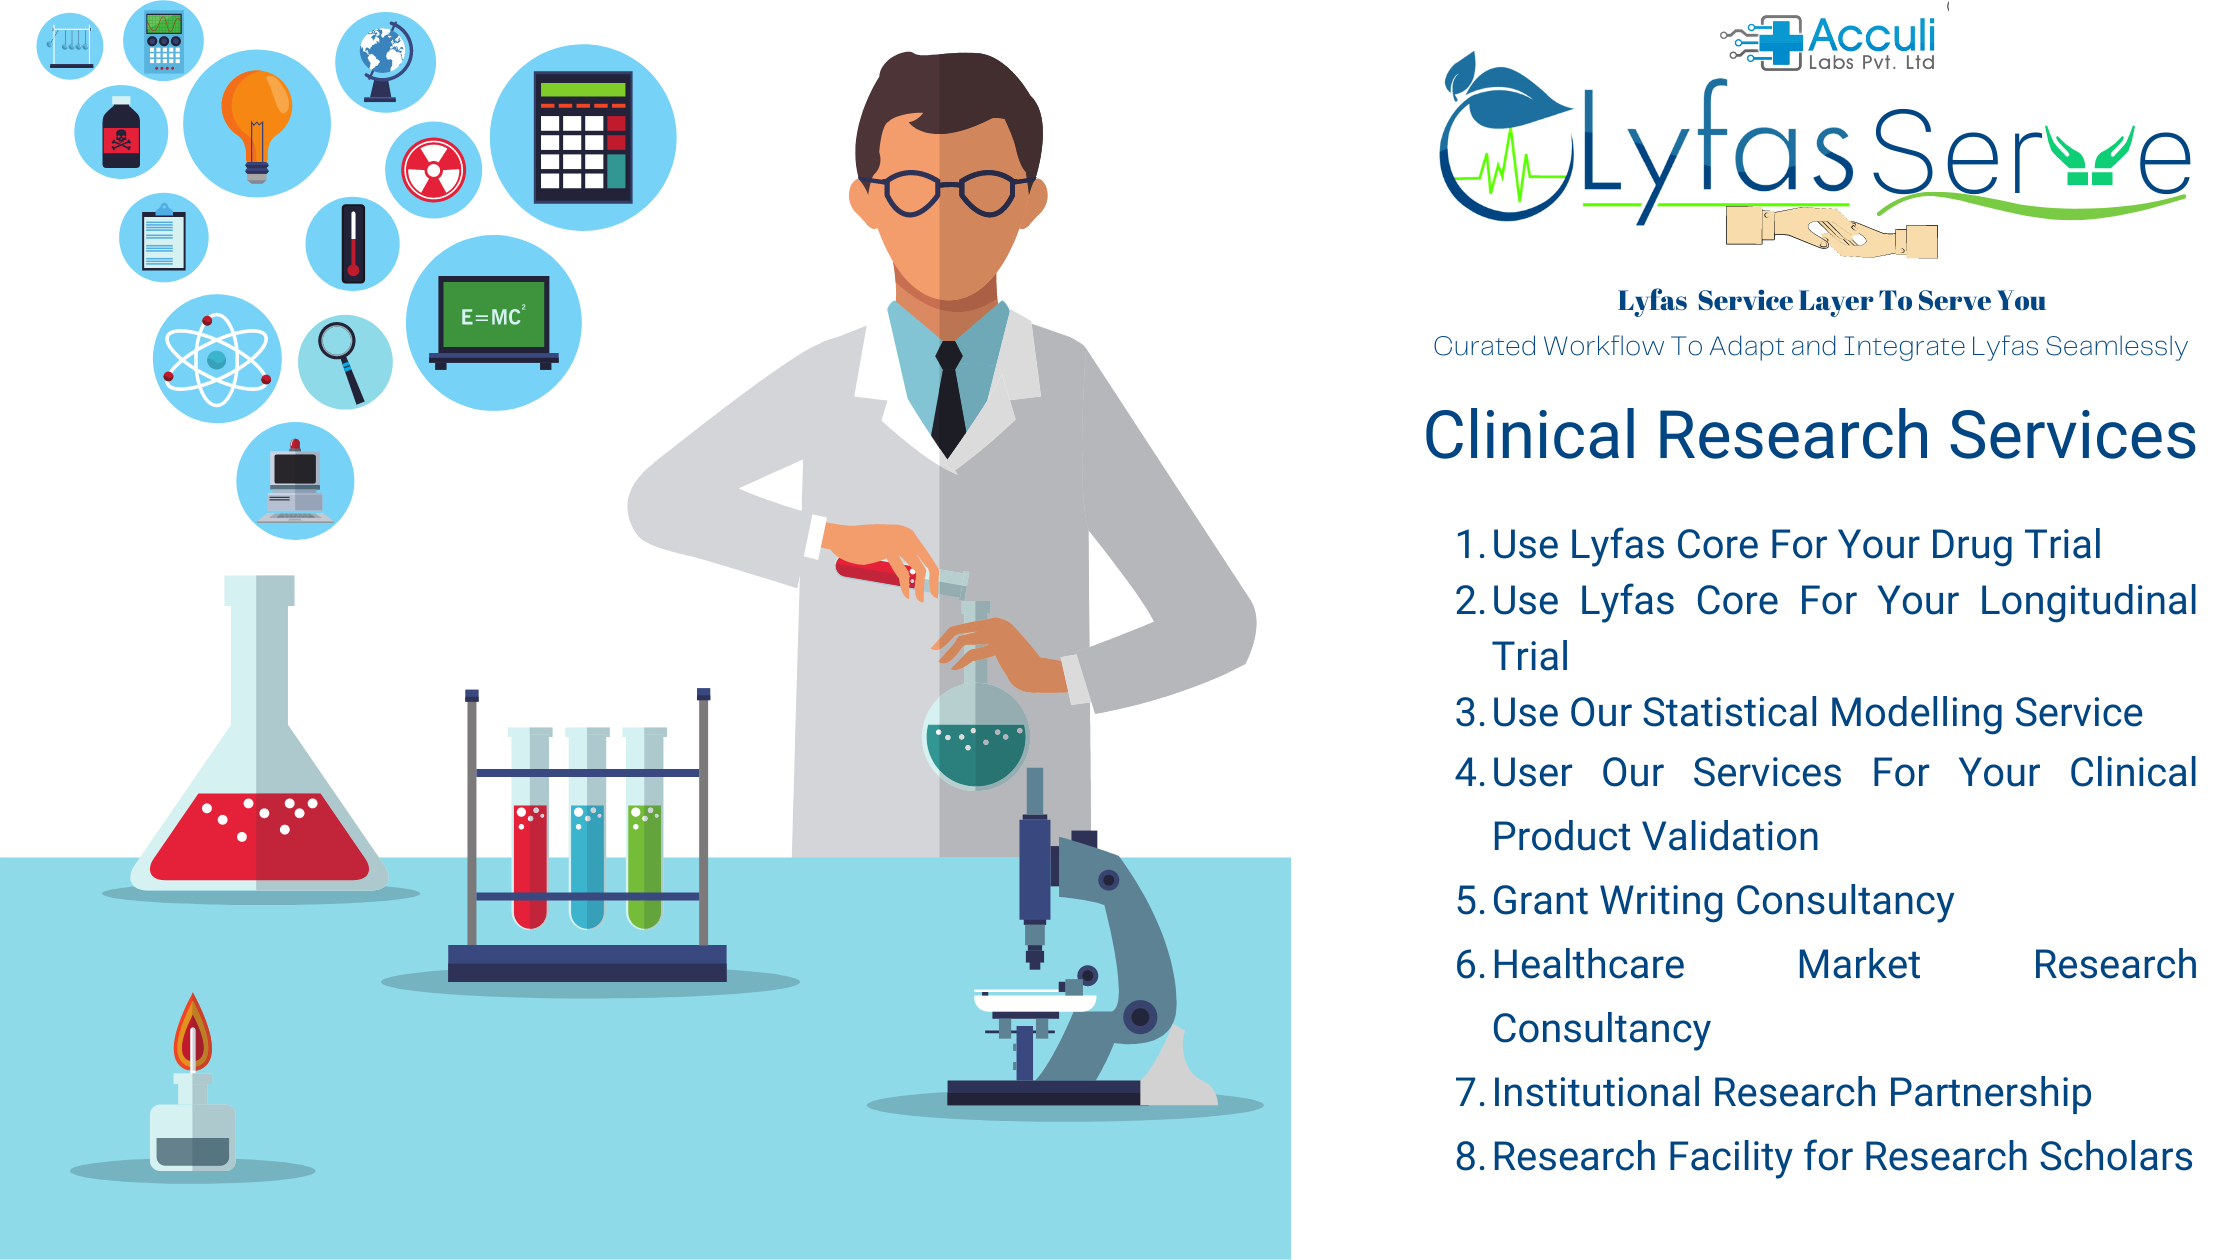 Lyfas Serve Clinical Research Services Use Our Expertise, Team, Technology, and Tools For Your Research Needs